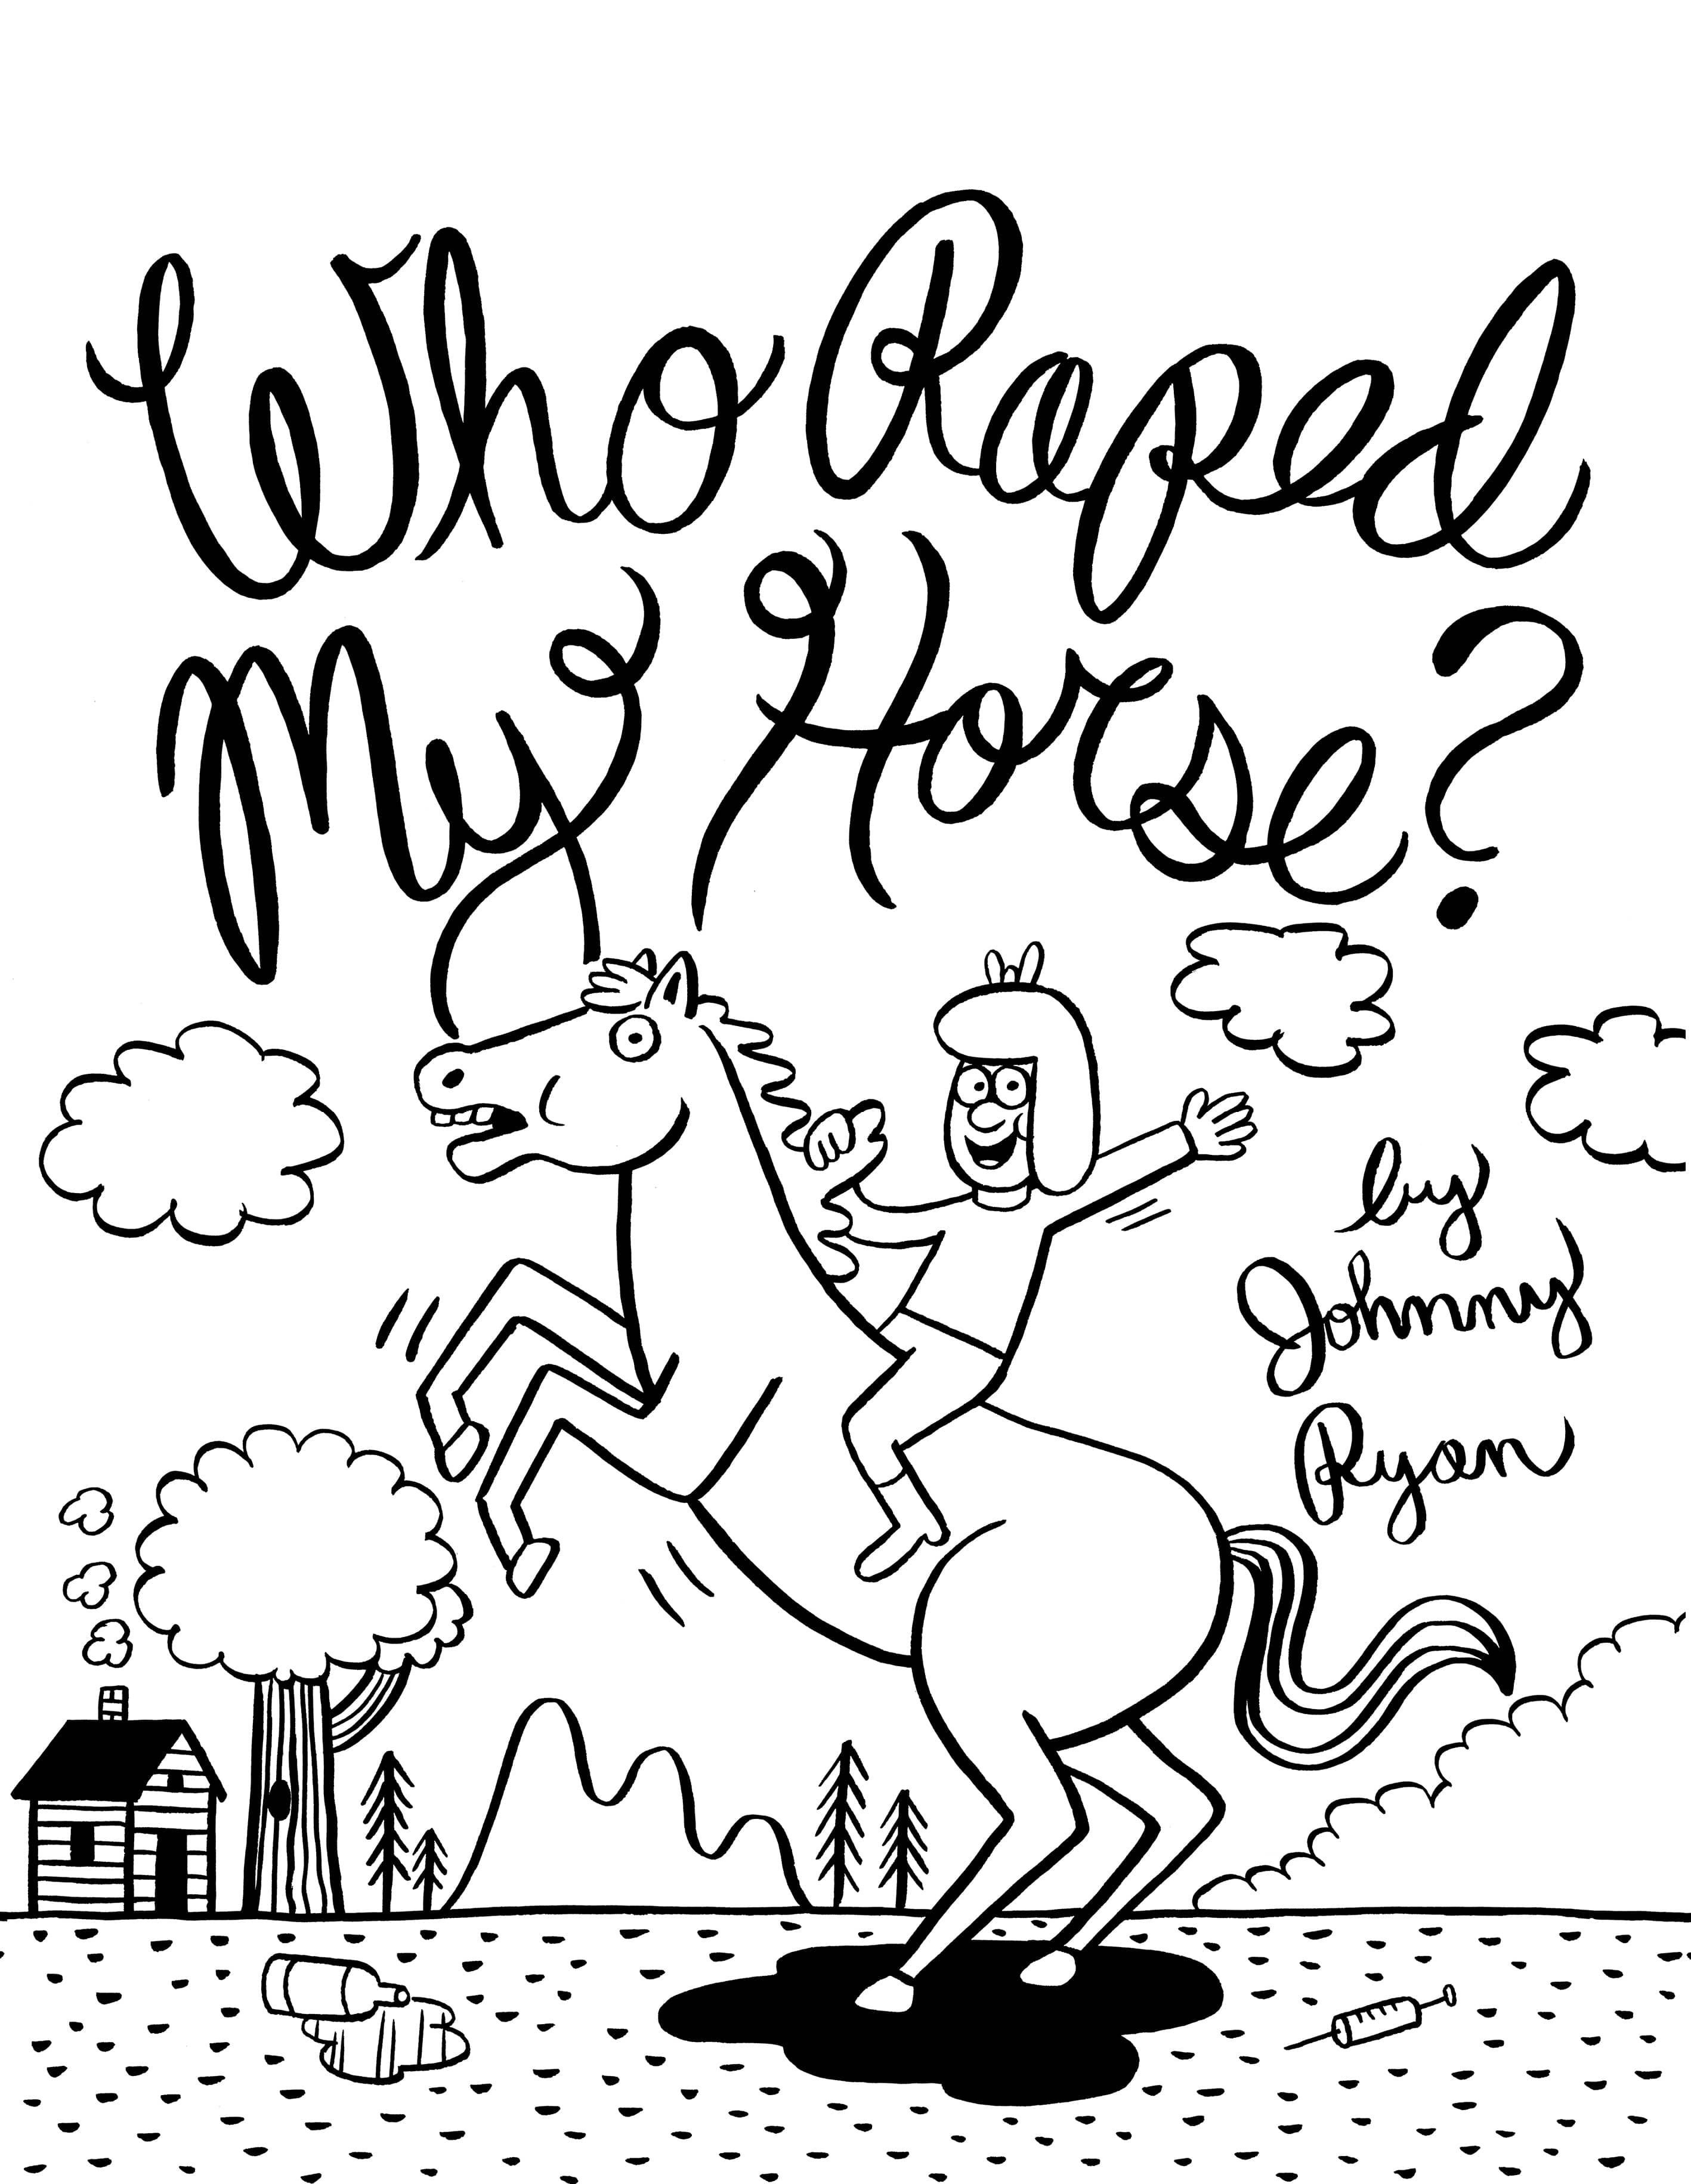 A tale of Terror issue three : WHO R*PED MY HORSE by Johnny Ryan